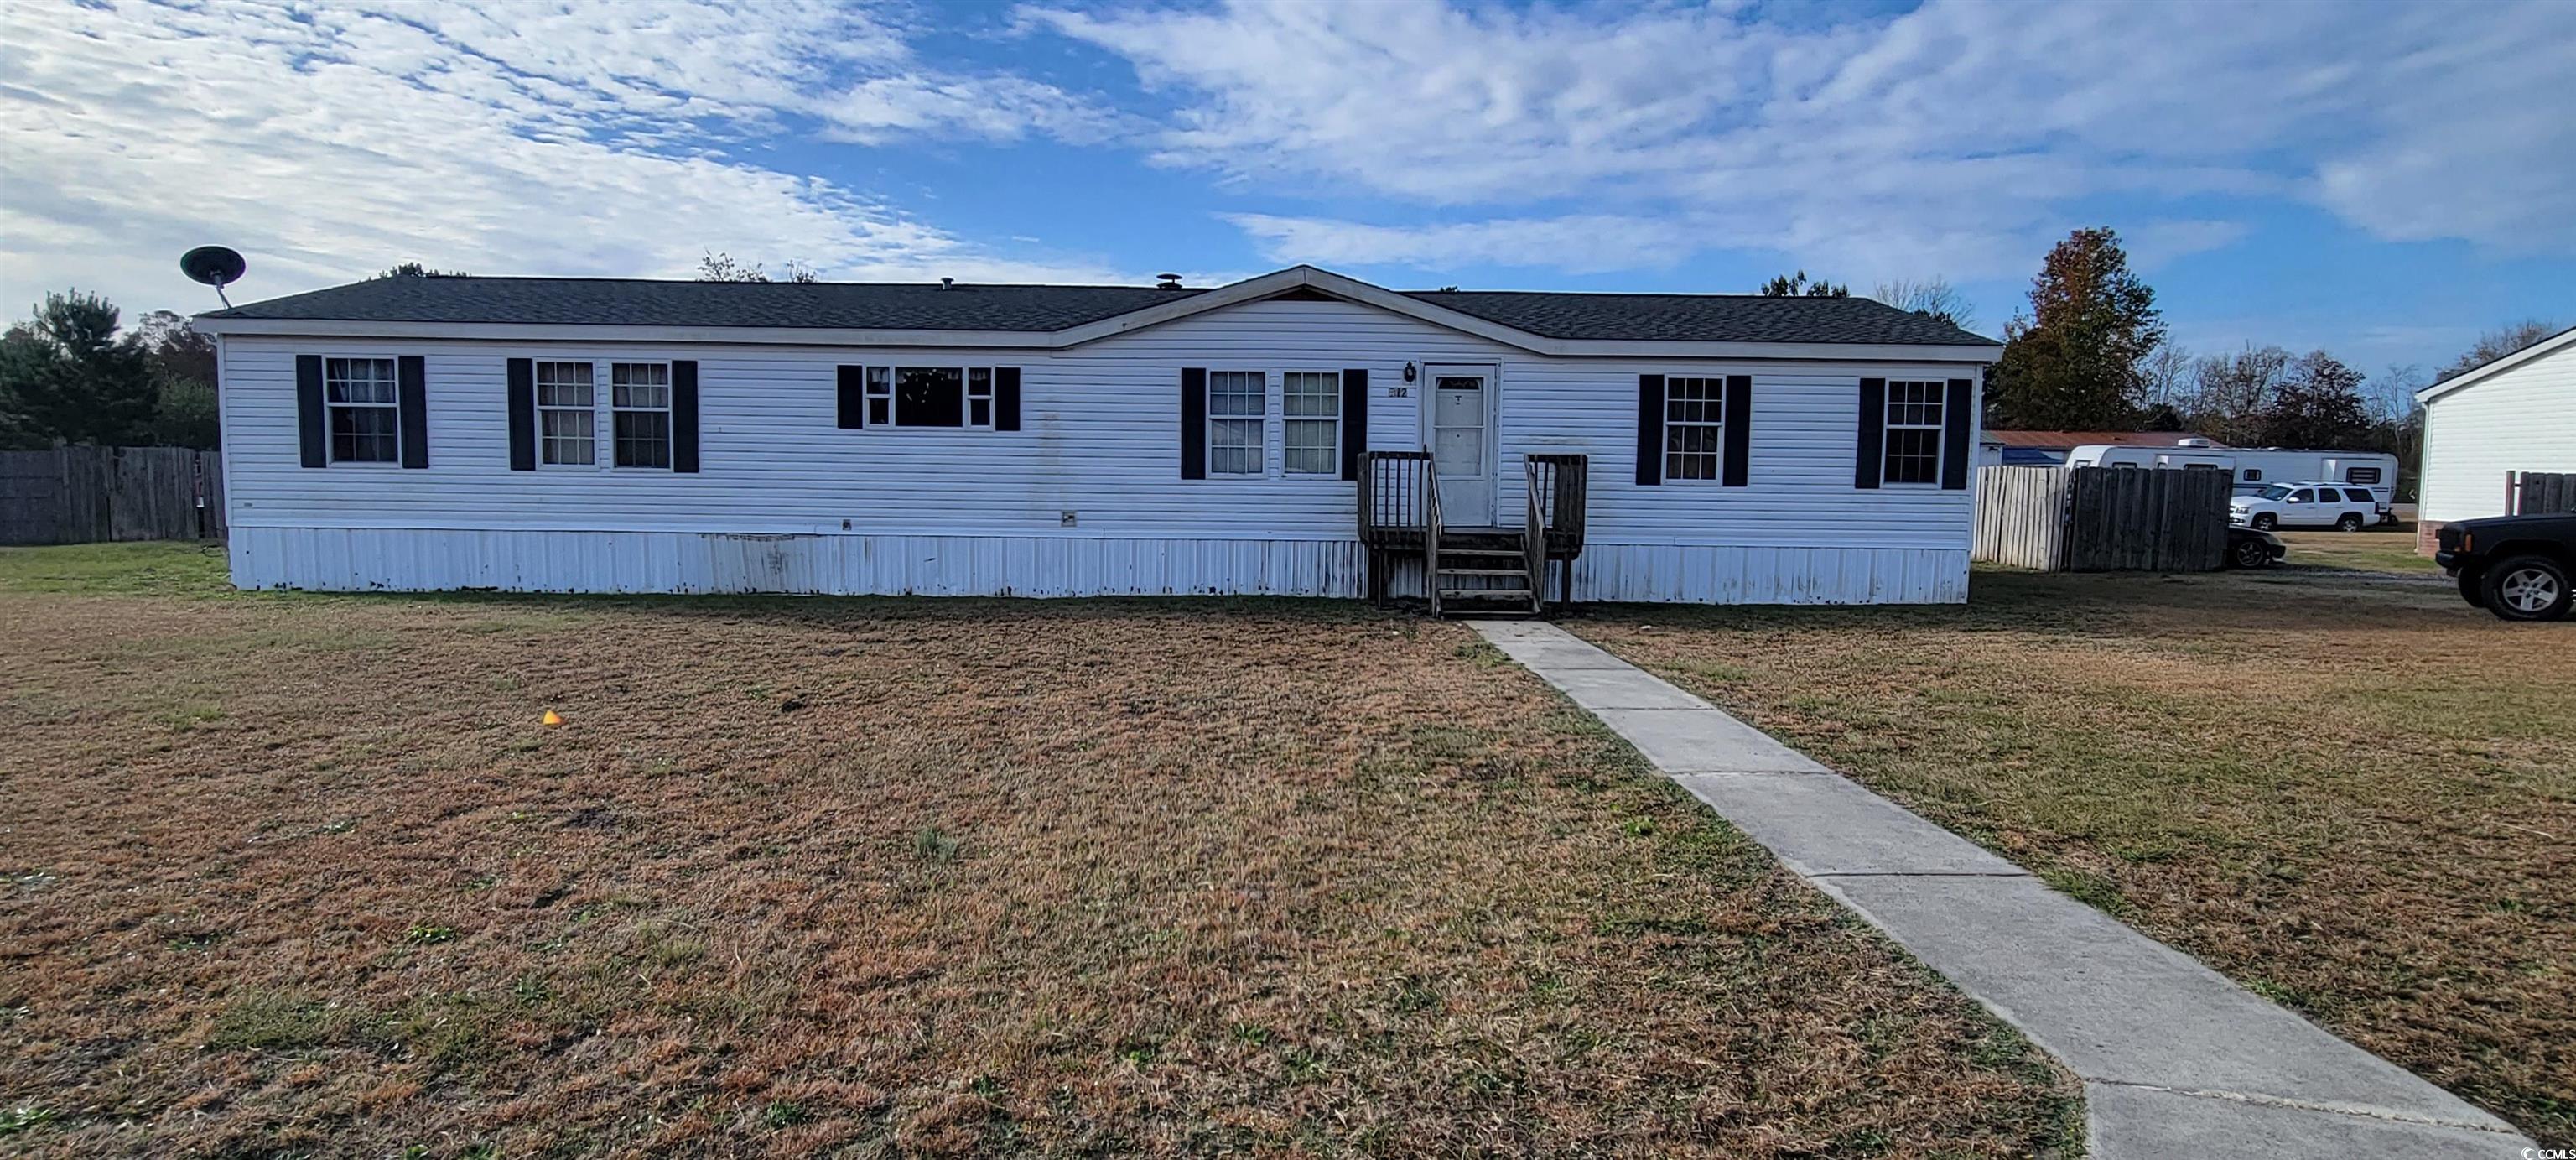 this 4 bedroom, 2 bath home is ready for your sweat equity! home sits on 0.5 acres in bryants landing off of highway 905 in conway. plenty of room inside with split bedroom floor plan, fireplace in living room, large kitchen/dining area.